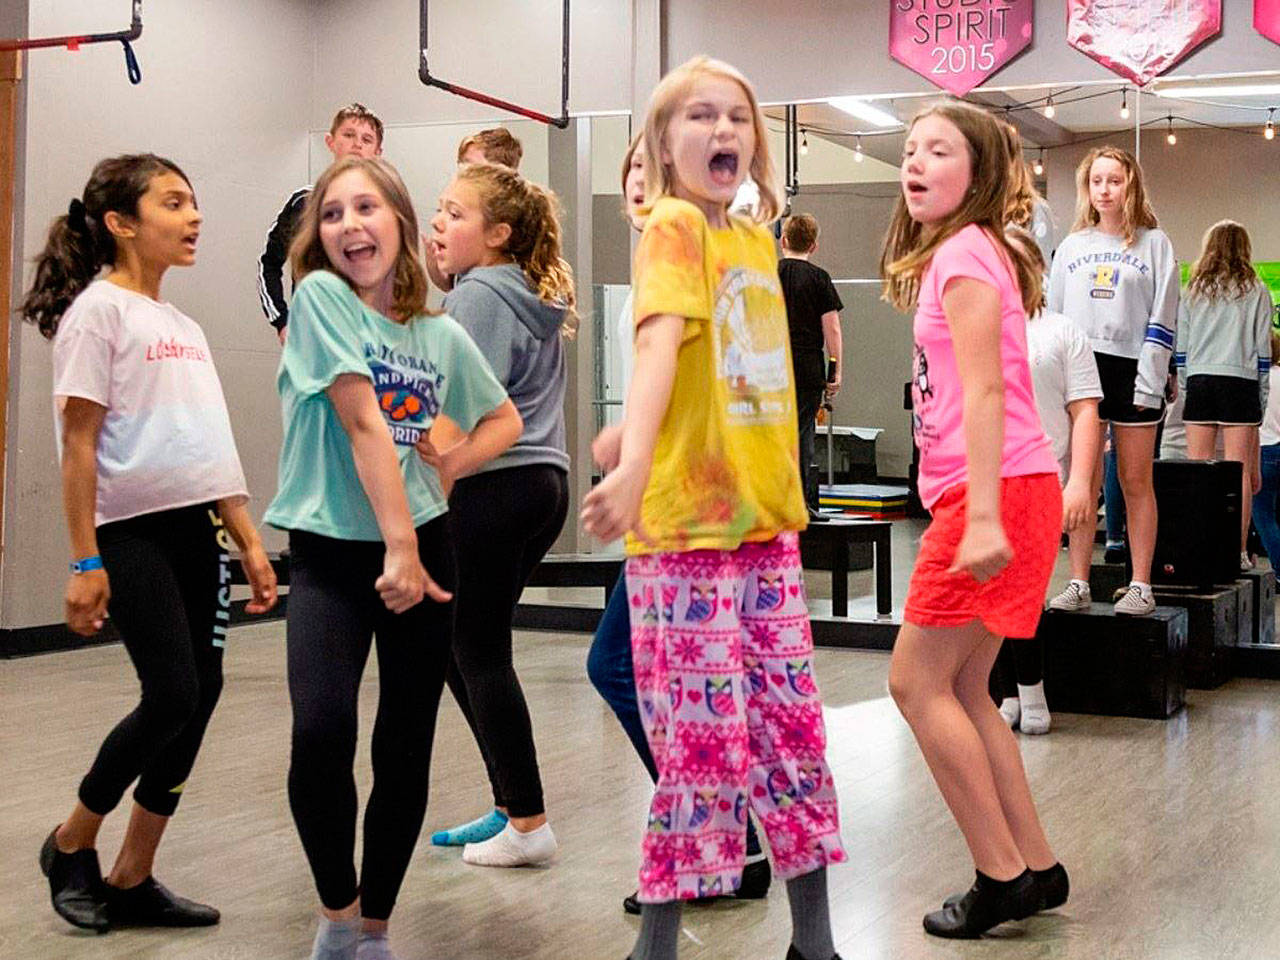 The Snoqualmie Arts Commission (SAC) and King County 4Culture are sponsoring a free Youth Improv Workshop on November 22, 6-8 p.m., at the Big Star Performing Arts Studio. Courtesy photo